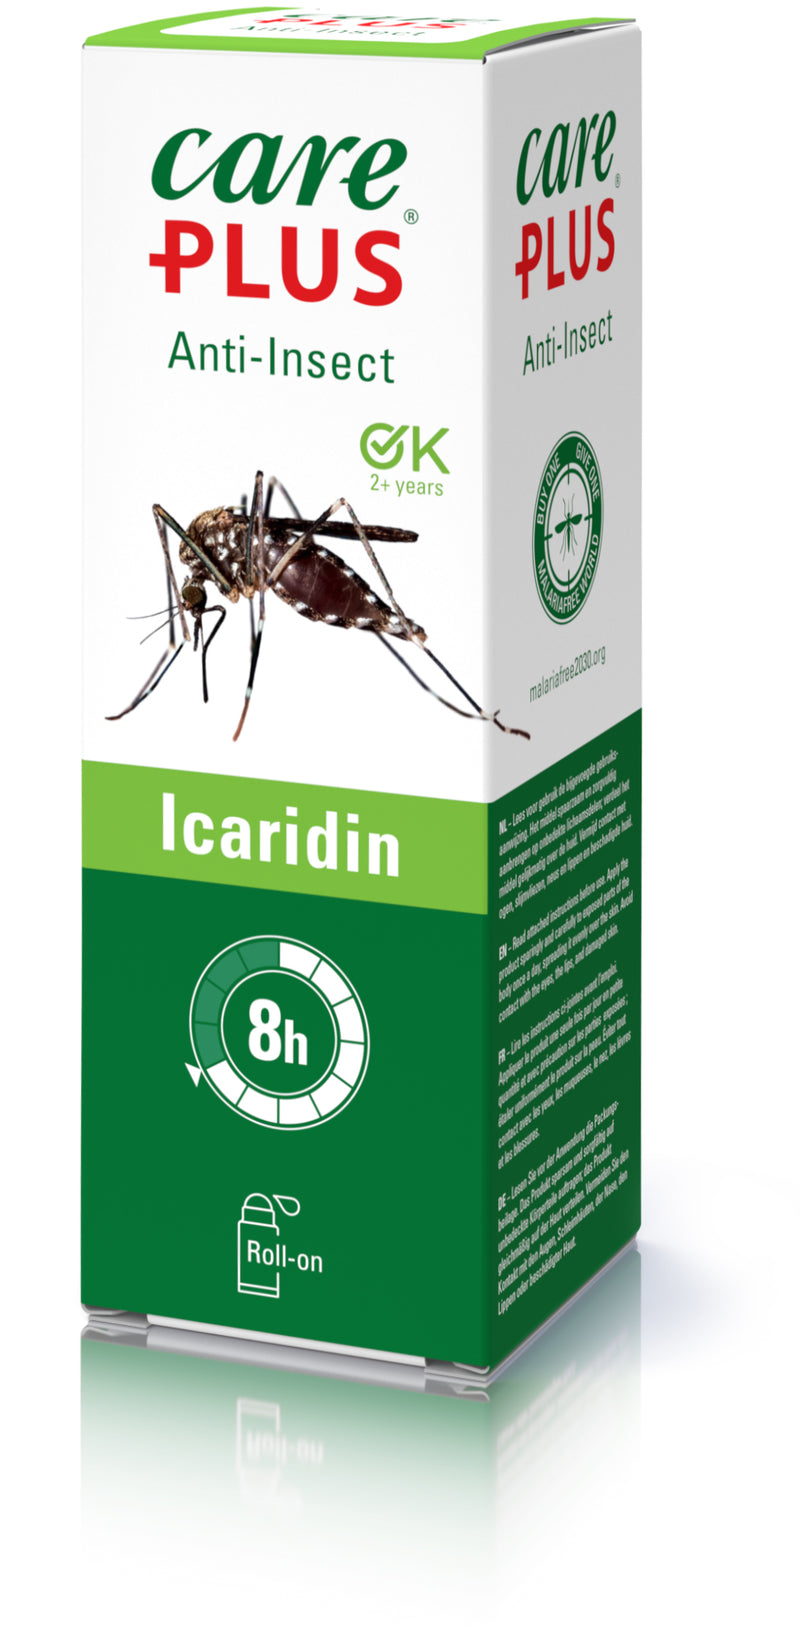 Care Plus Anti-Insect Icaridin roll-on, 50ml